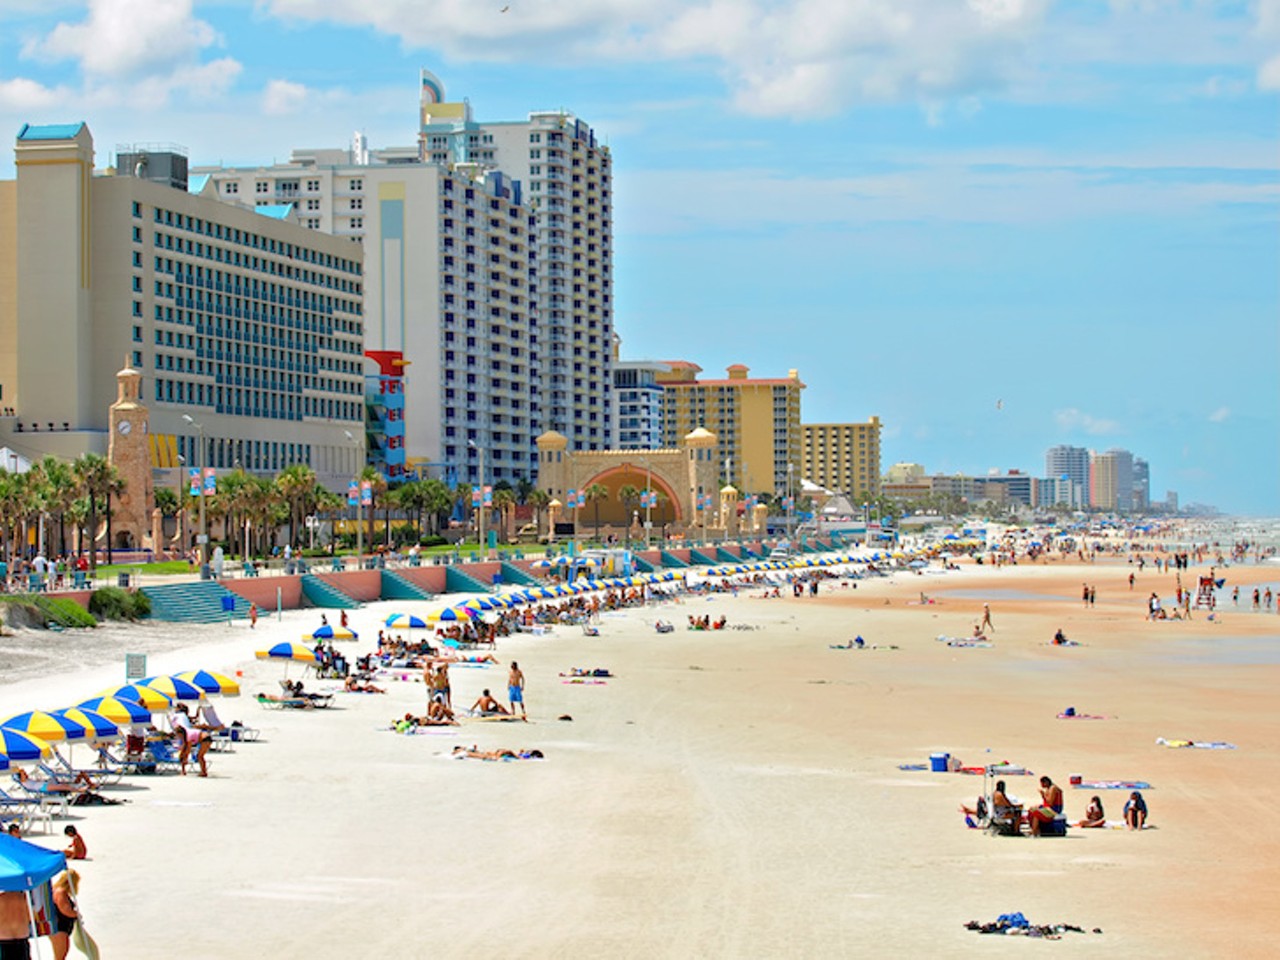 Daytona Beach  
Beyond bikers and spring breakers, this world-famous beach town features history, character and waves for days. A quick one-hour drive northeast from Orlando, this location on the Atlantic Coast is perfect for a day trip or semi-staycation.
Photo via Adobe Stock